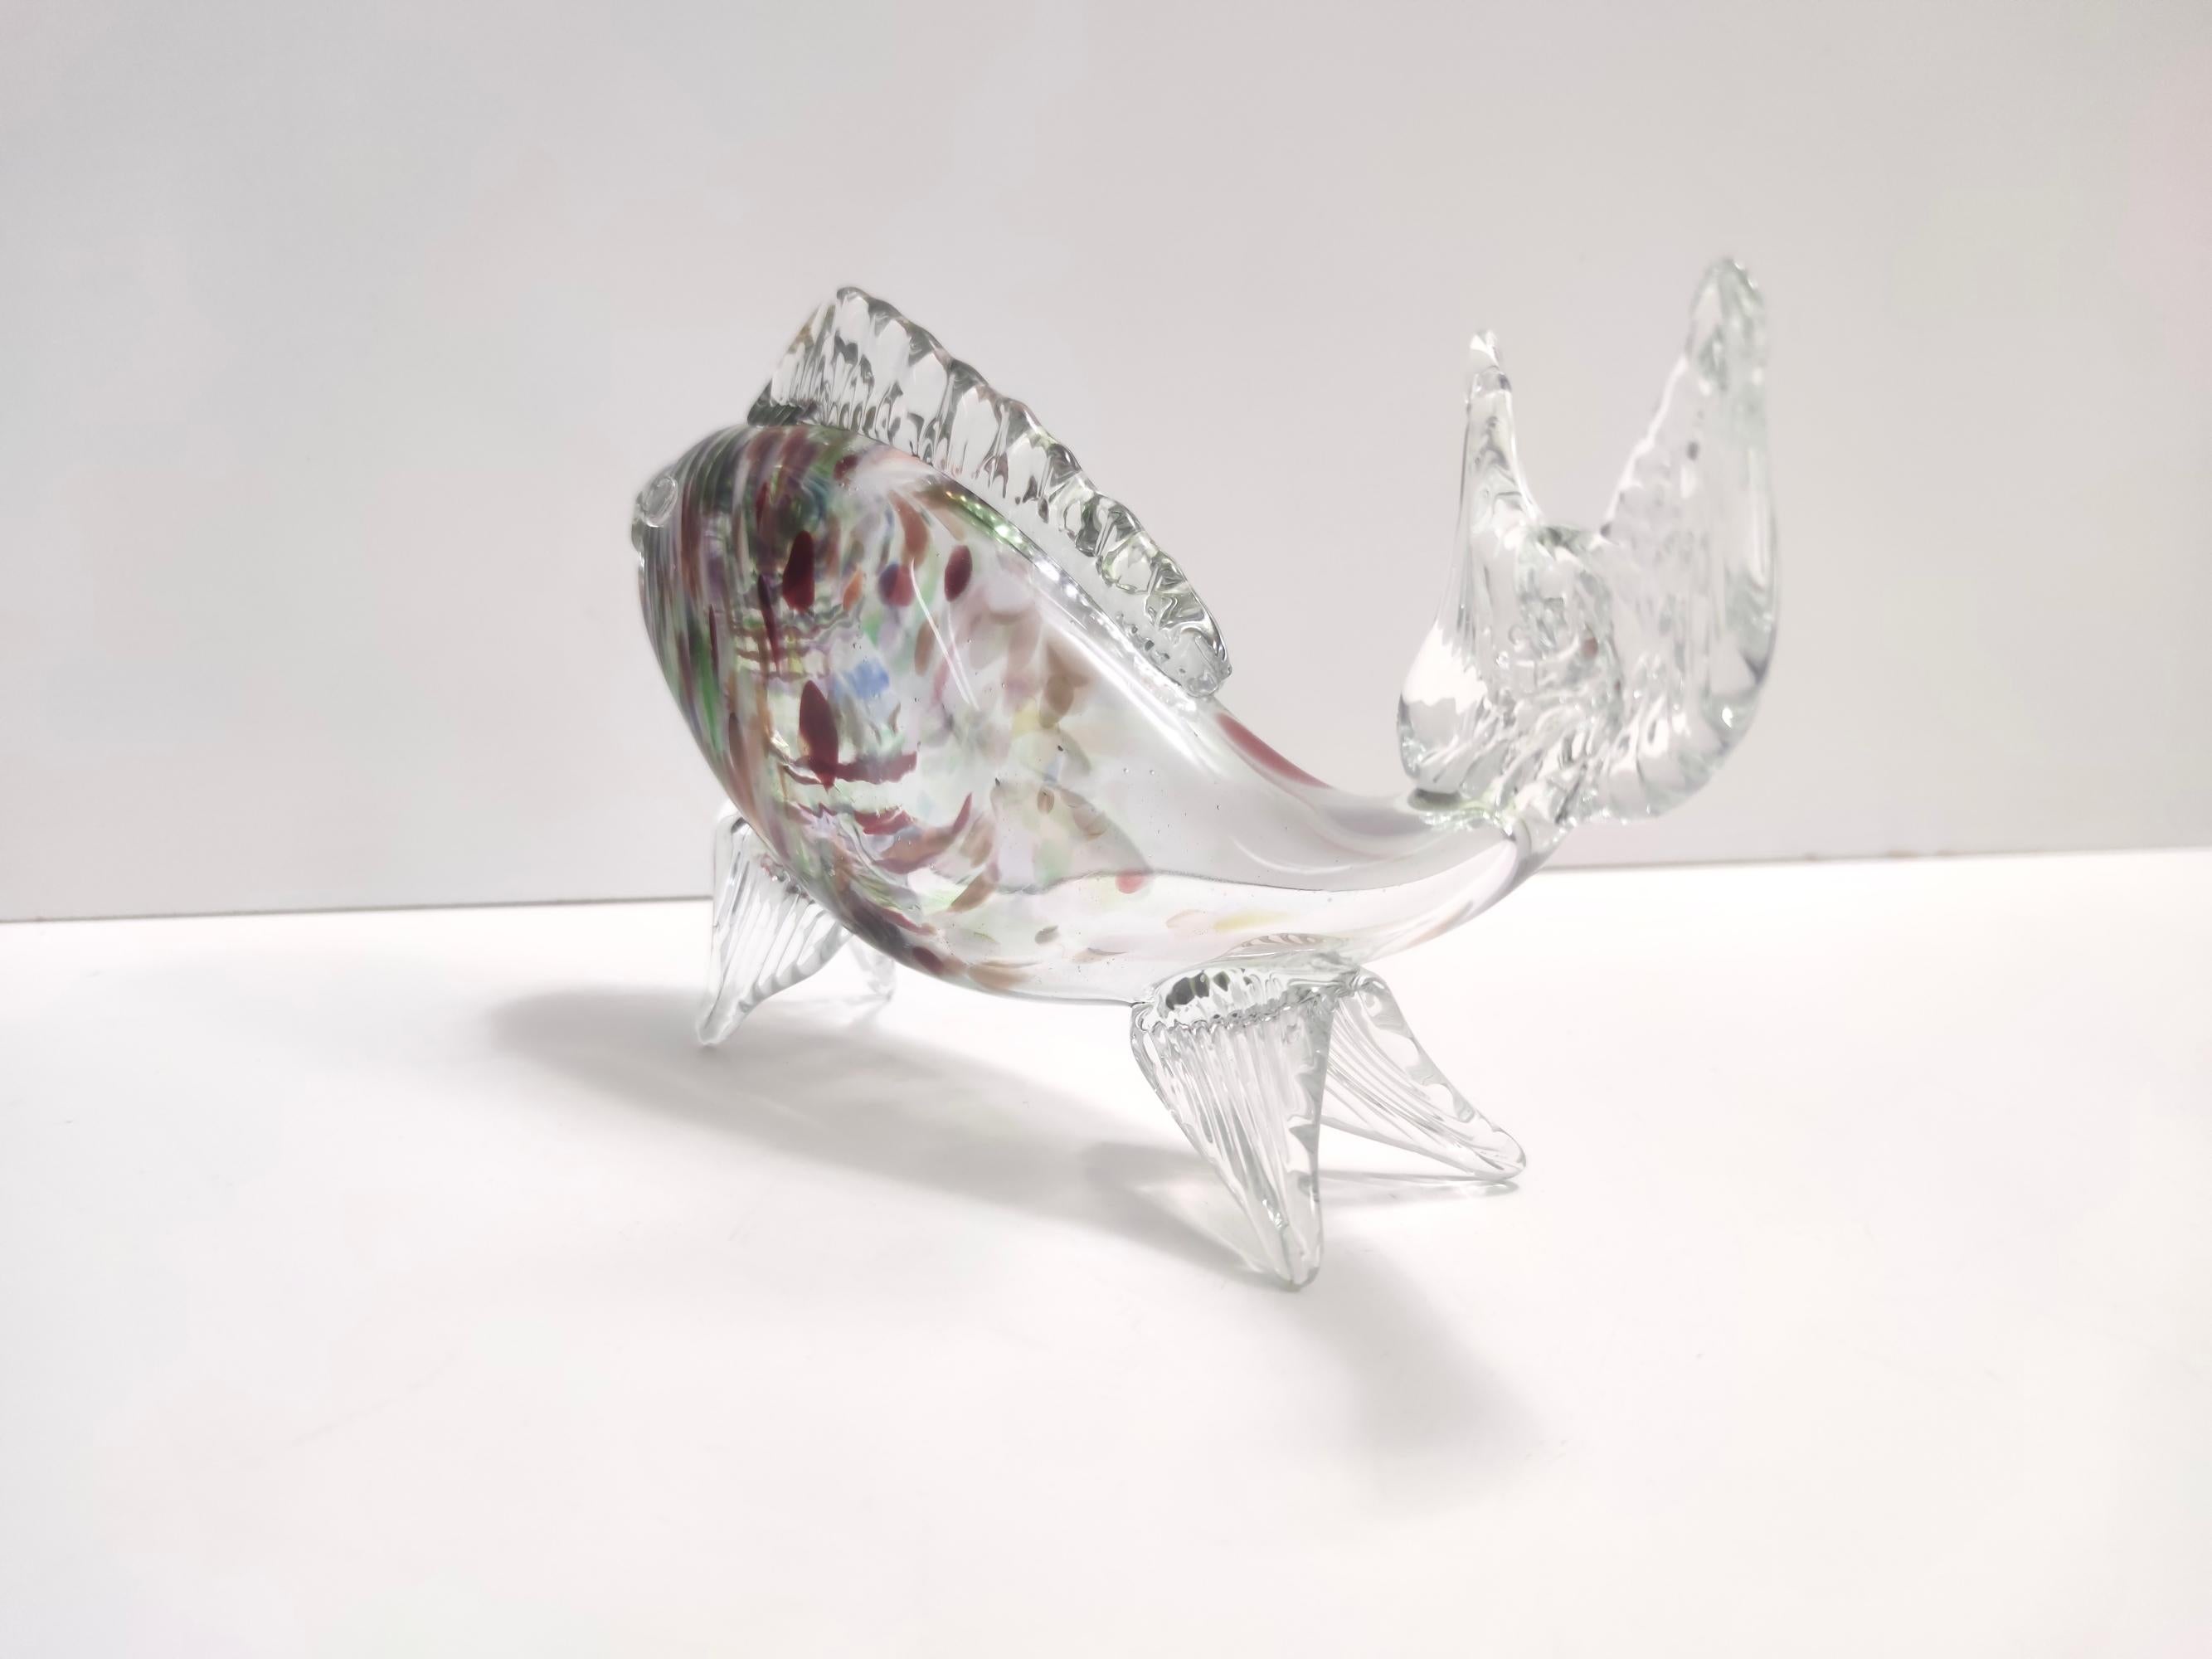 Vintage Murano Glass Fish Decorative Figurine by Fratelli Toso, Italy For Sale 2